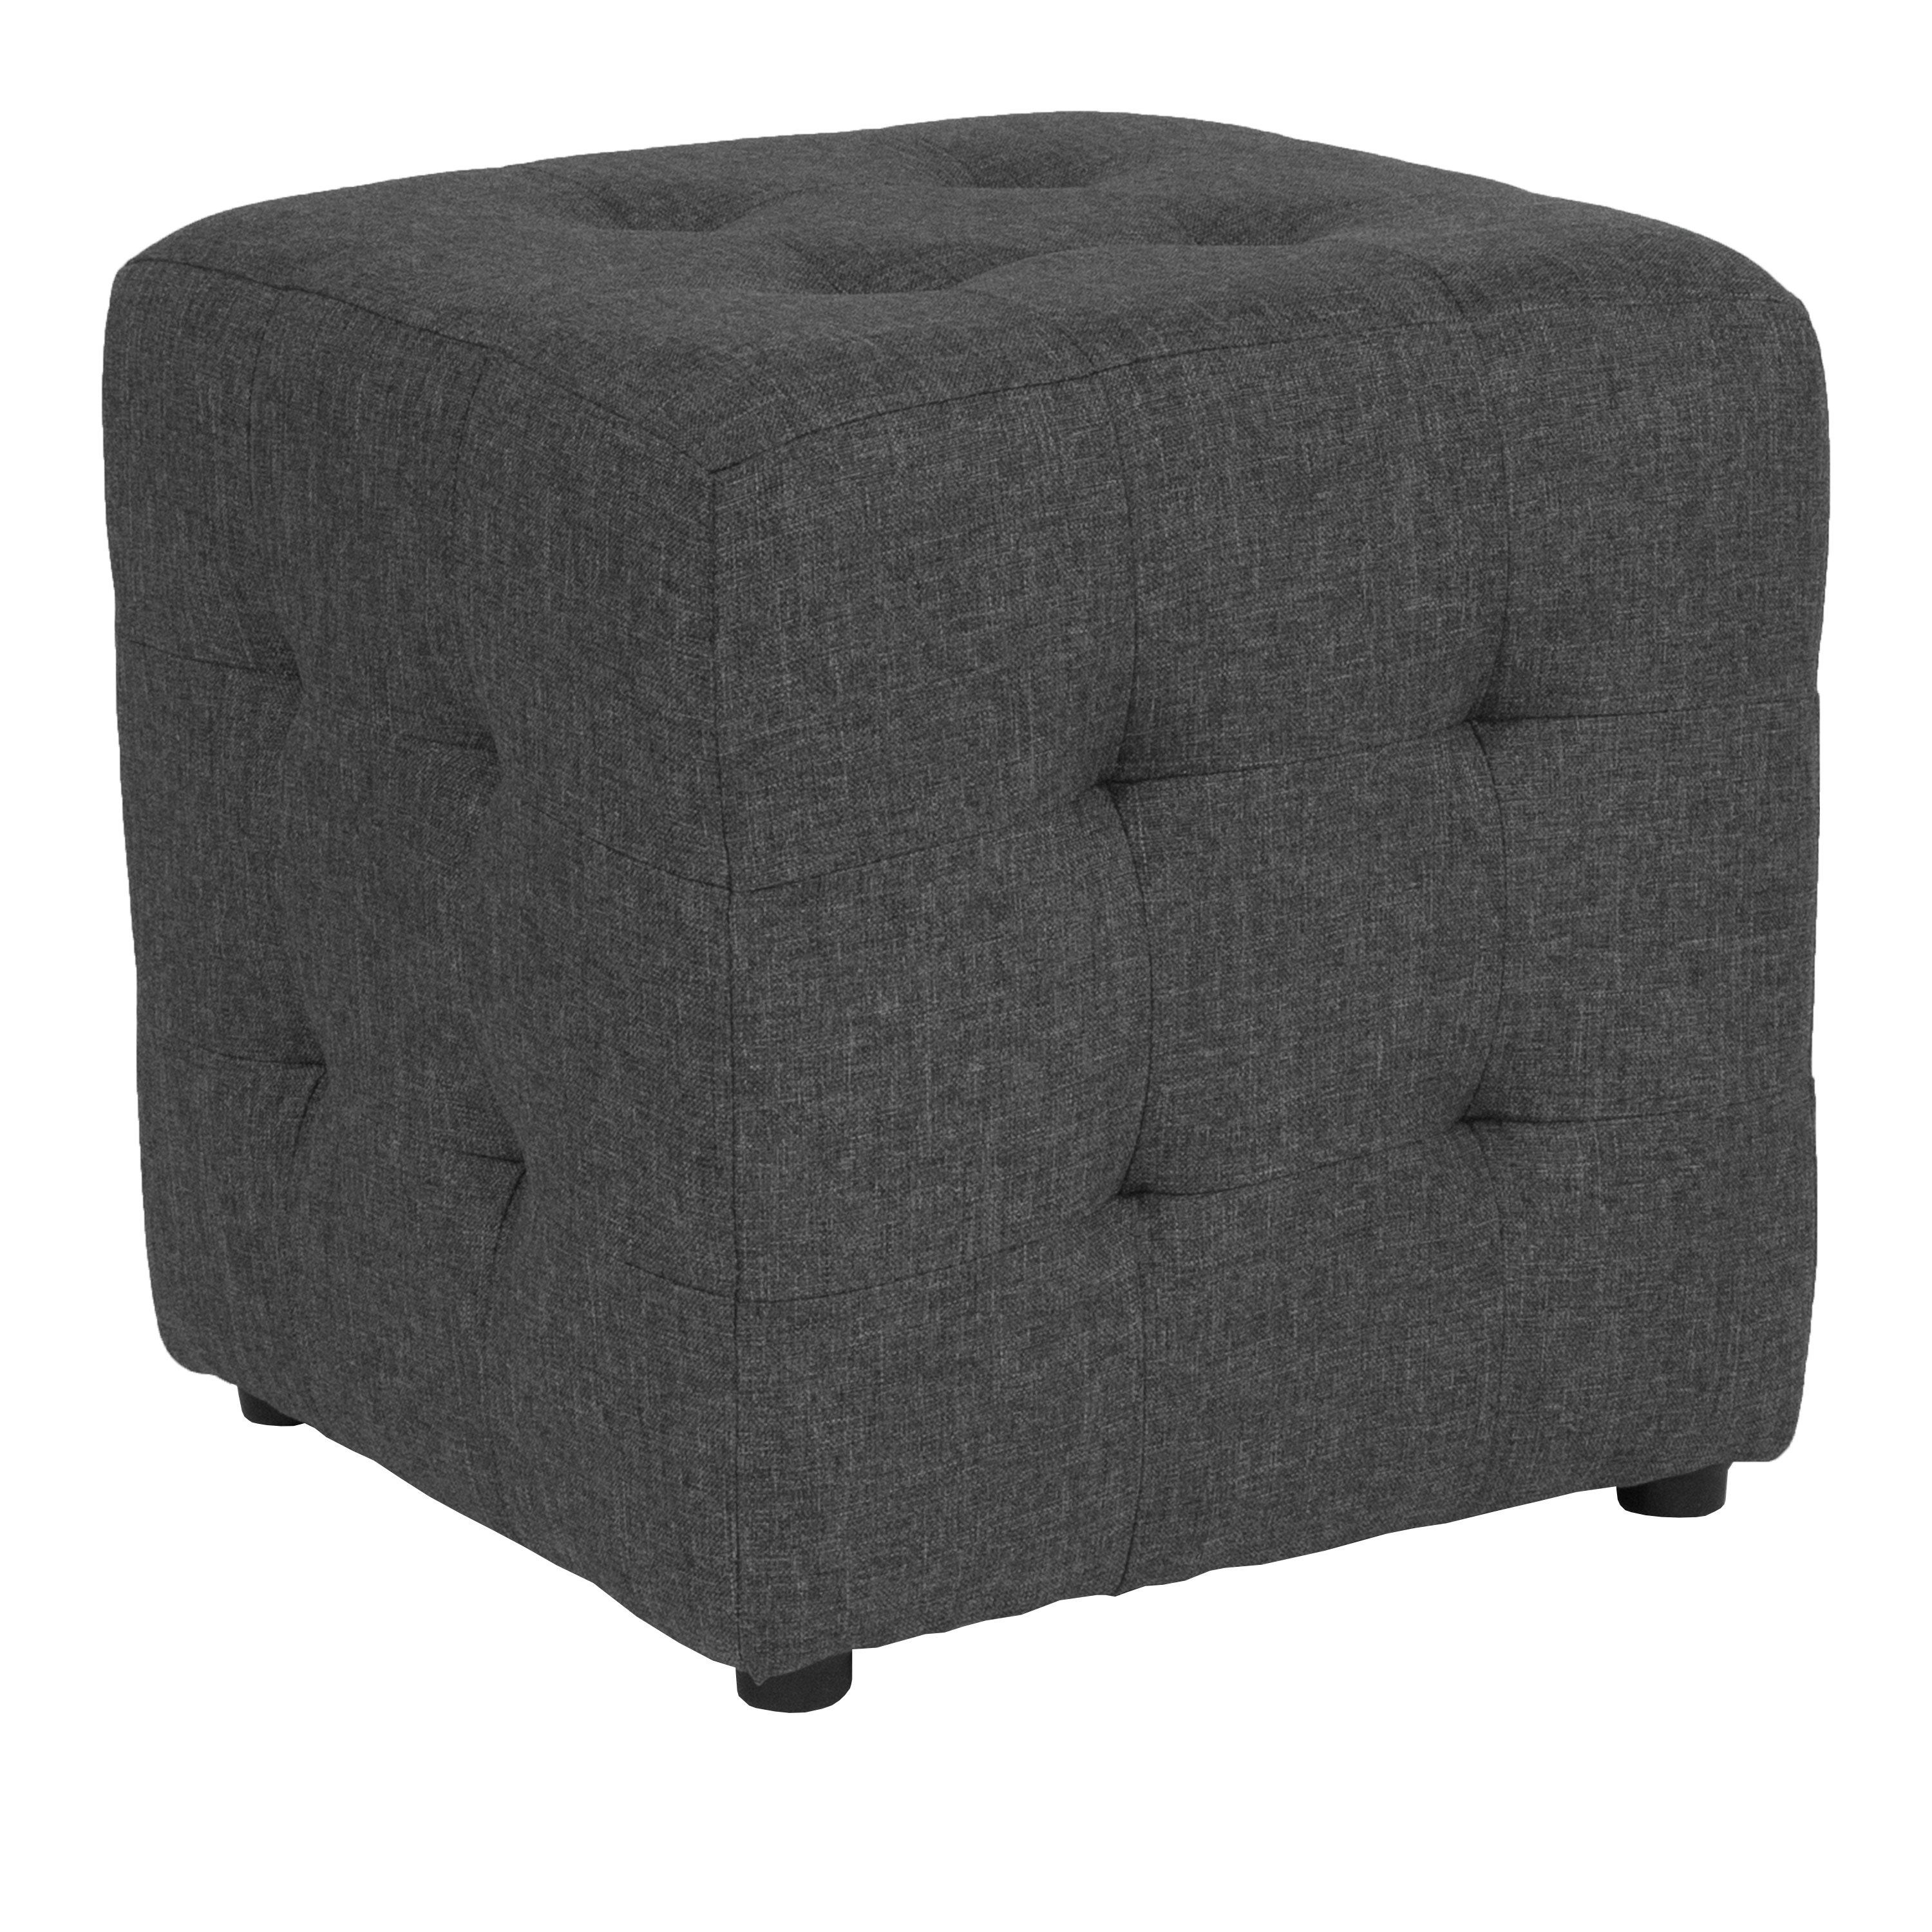 Flash Furniture QY-S02-DGY-GG Dark Gray Fabric Tufted Upholstered Ottoman Pouf